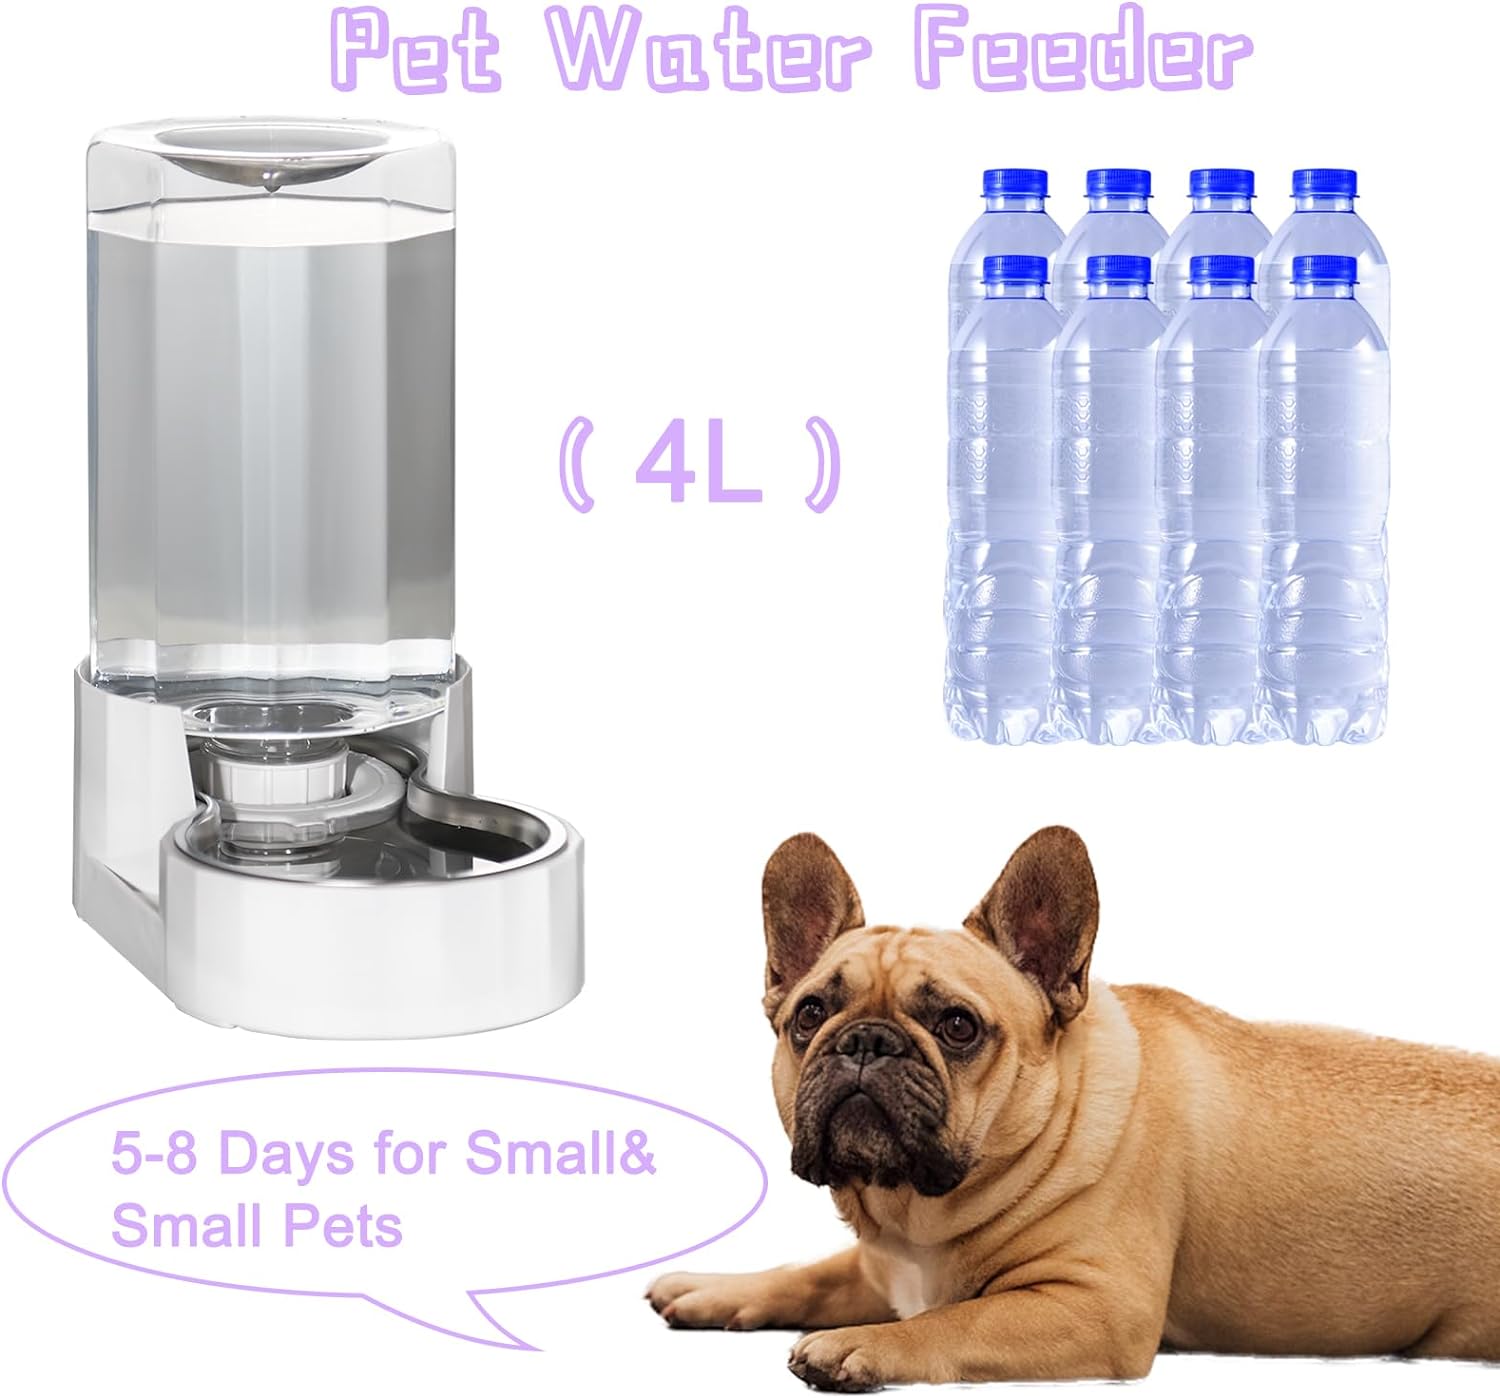 RIZZARI Automatic Gravity Stainless Steel Pet Waterer, Fortunate Angular Water Feeder with Edges, 100% BPA-Free, Safe and Large Capacity, Suitable for Small and Medium-Sized Cats and Dogs (4L)